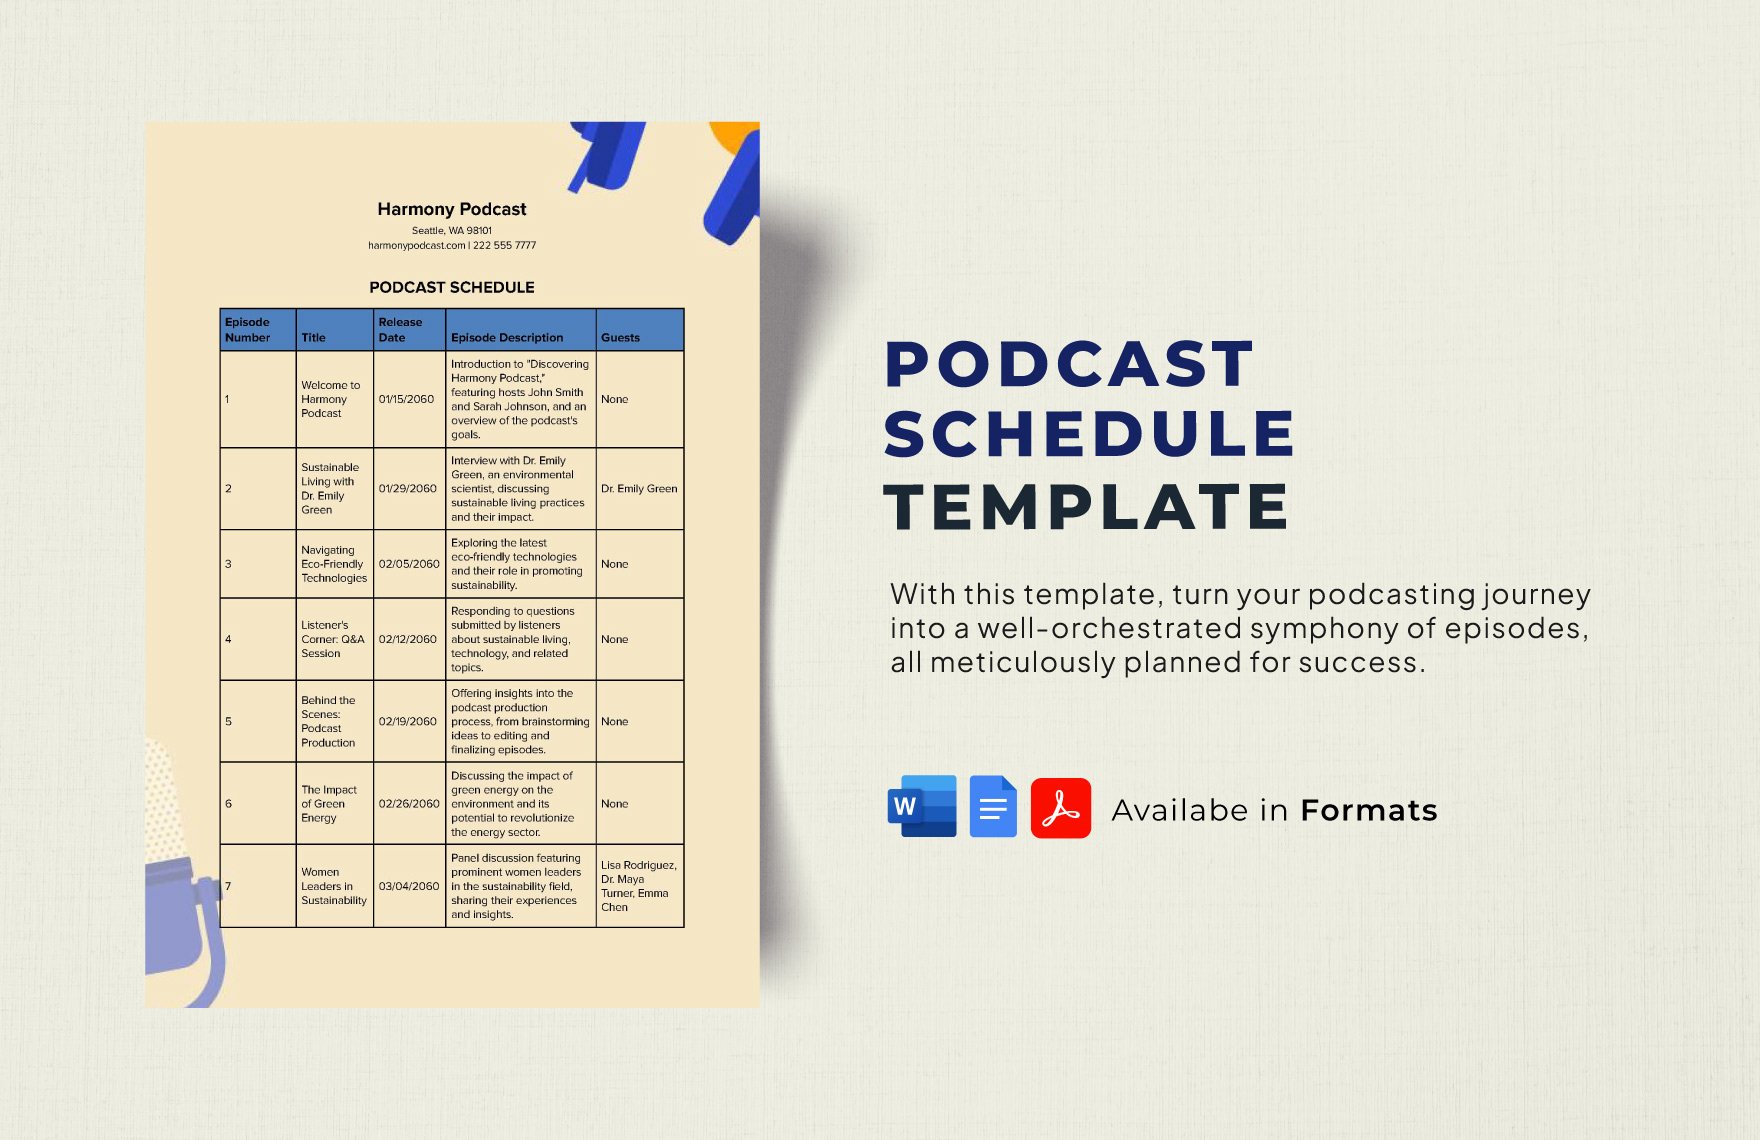 Podcast Schedule Template in Word, Google Docs, PDF